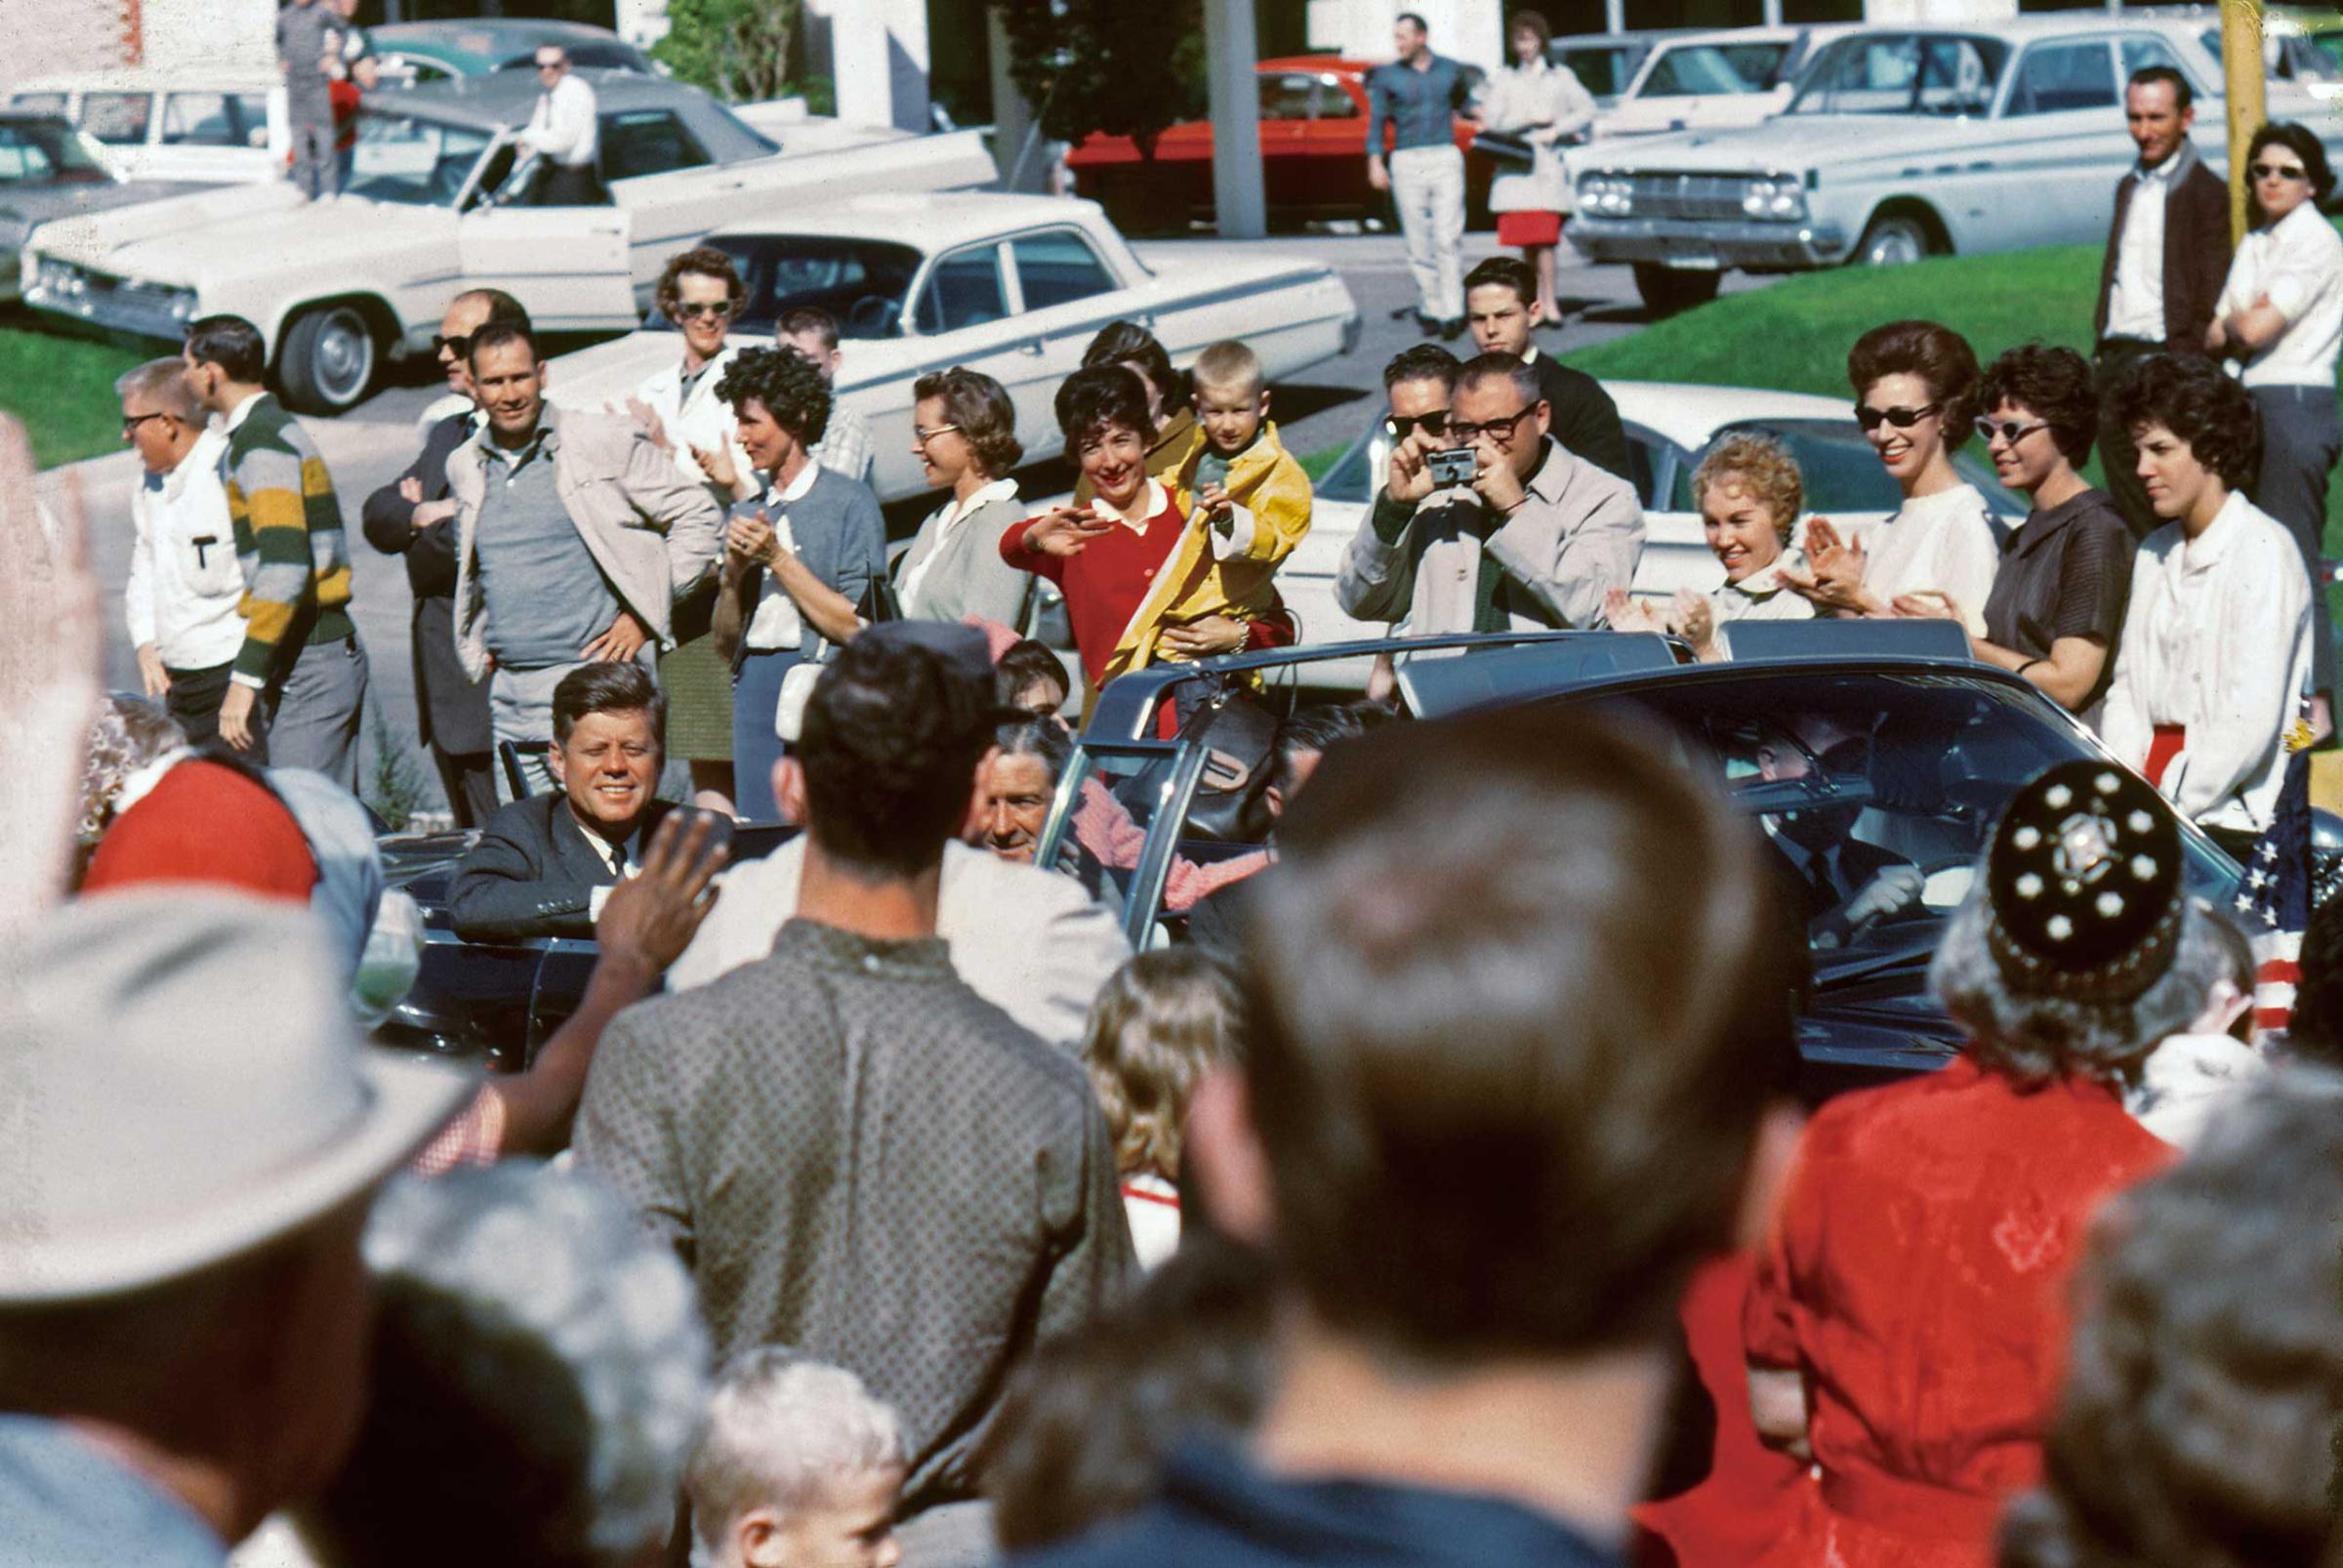 Despite ill political winds in Texas, the Kennedys were greeted on Nov. 22nd by cheering throngs in Dallas.